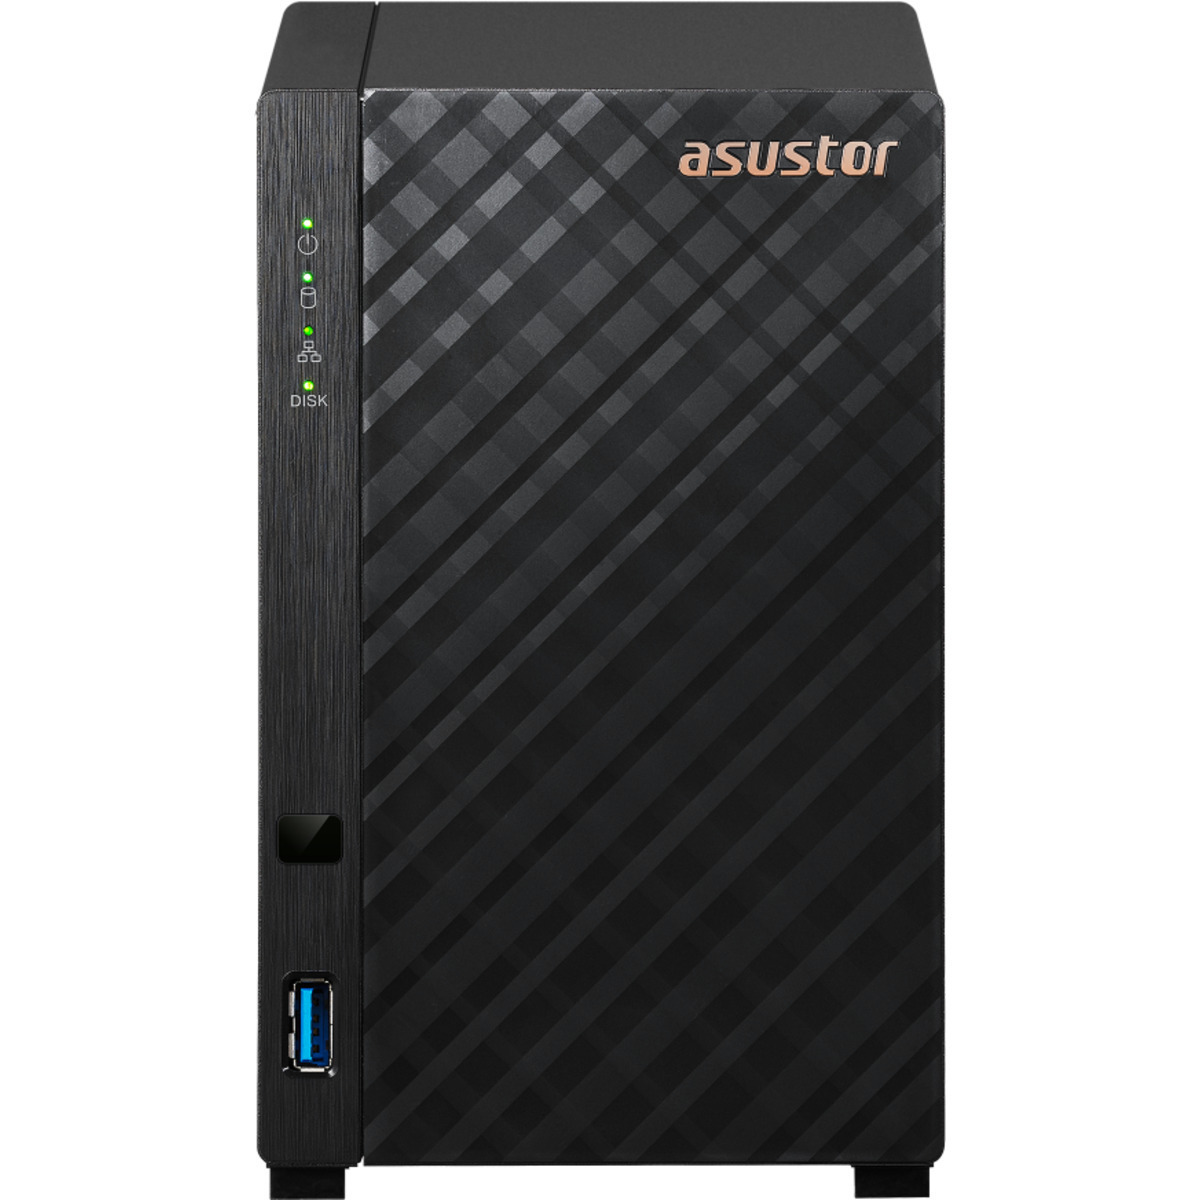 buy $406 ASUSTOR DRIVESTOR 2 AS1102T 8tb Desktop NAS - Network Attached Storage Device 2x4000gb Western Digital Red Plus WD40EFPX 3.5 5400rpm SATA 6Gb/s HDD NAS Class Drives Installed - Burn-In Tested - nas headquarters buy network attached storage server device das new raid-5 free shipping usa DRIVESTOR 2 AS1102T